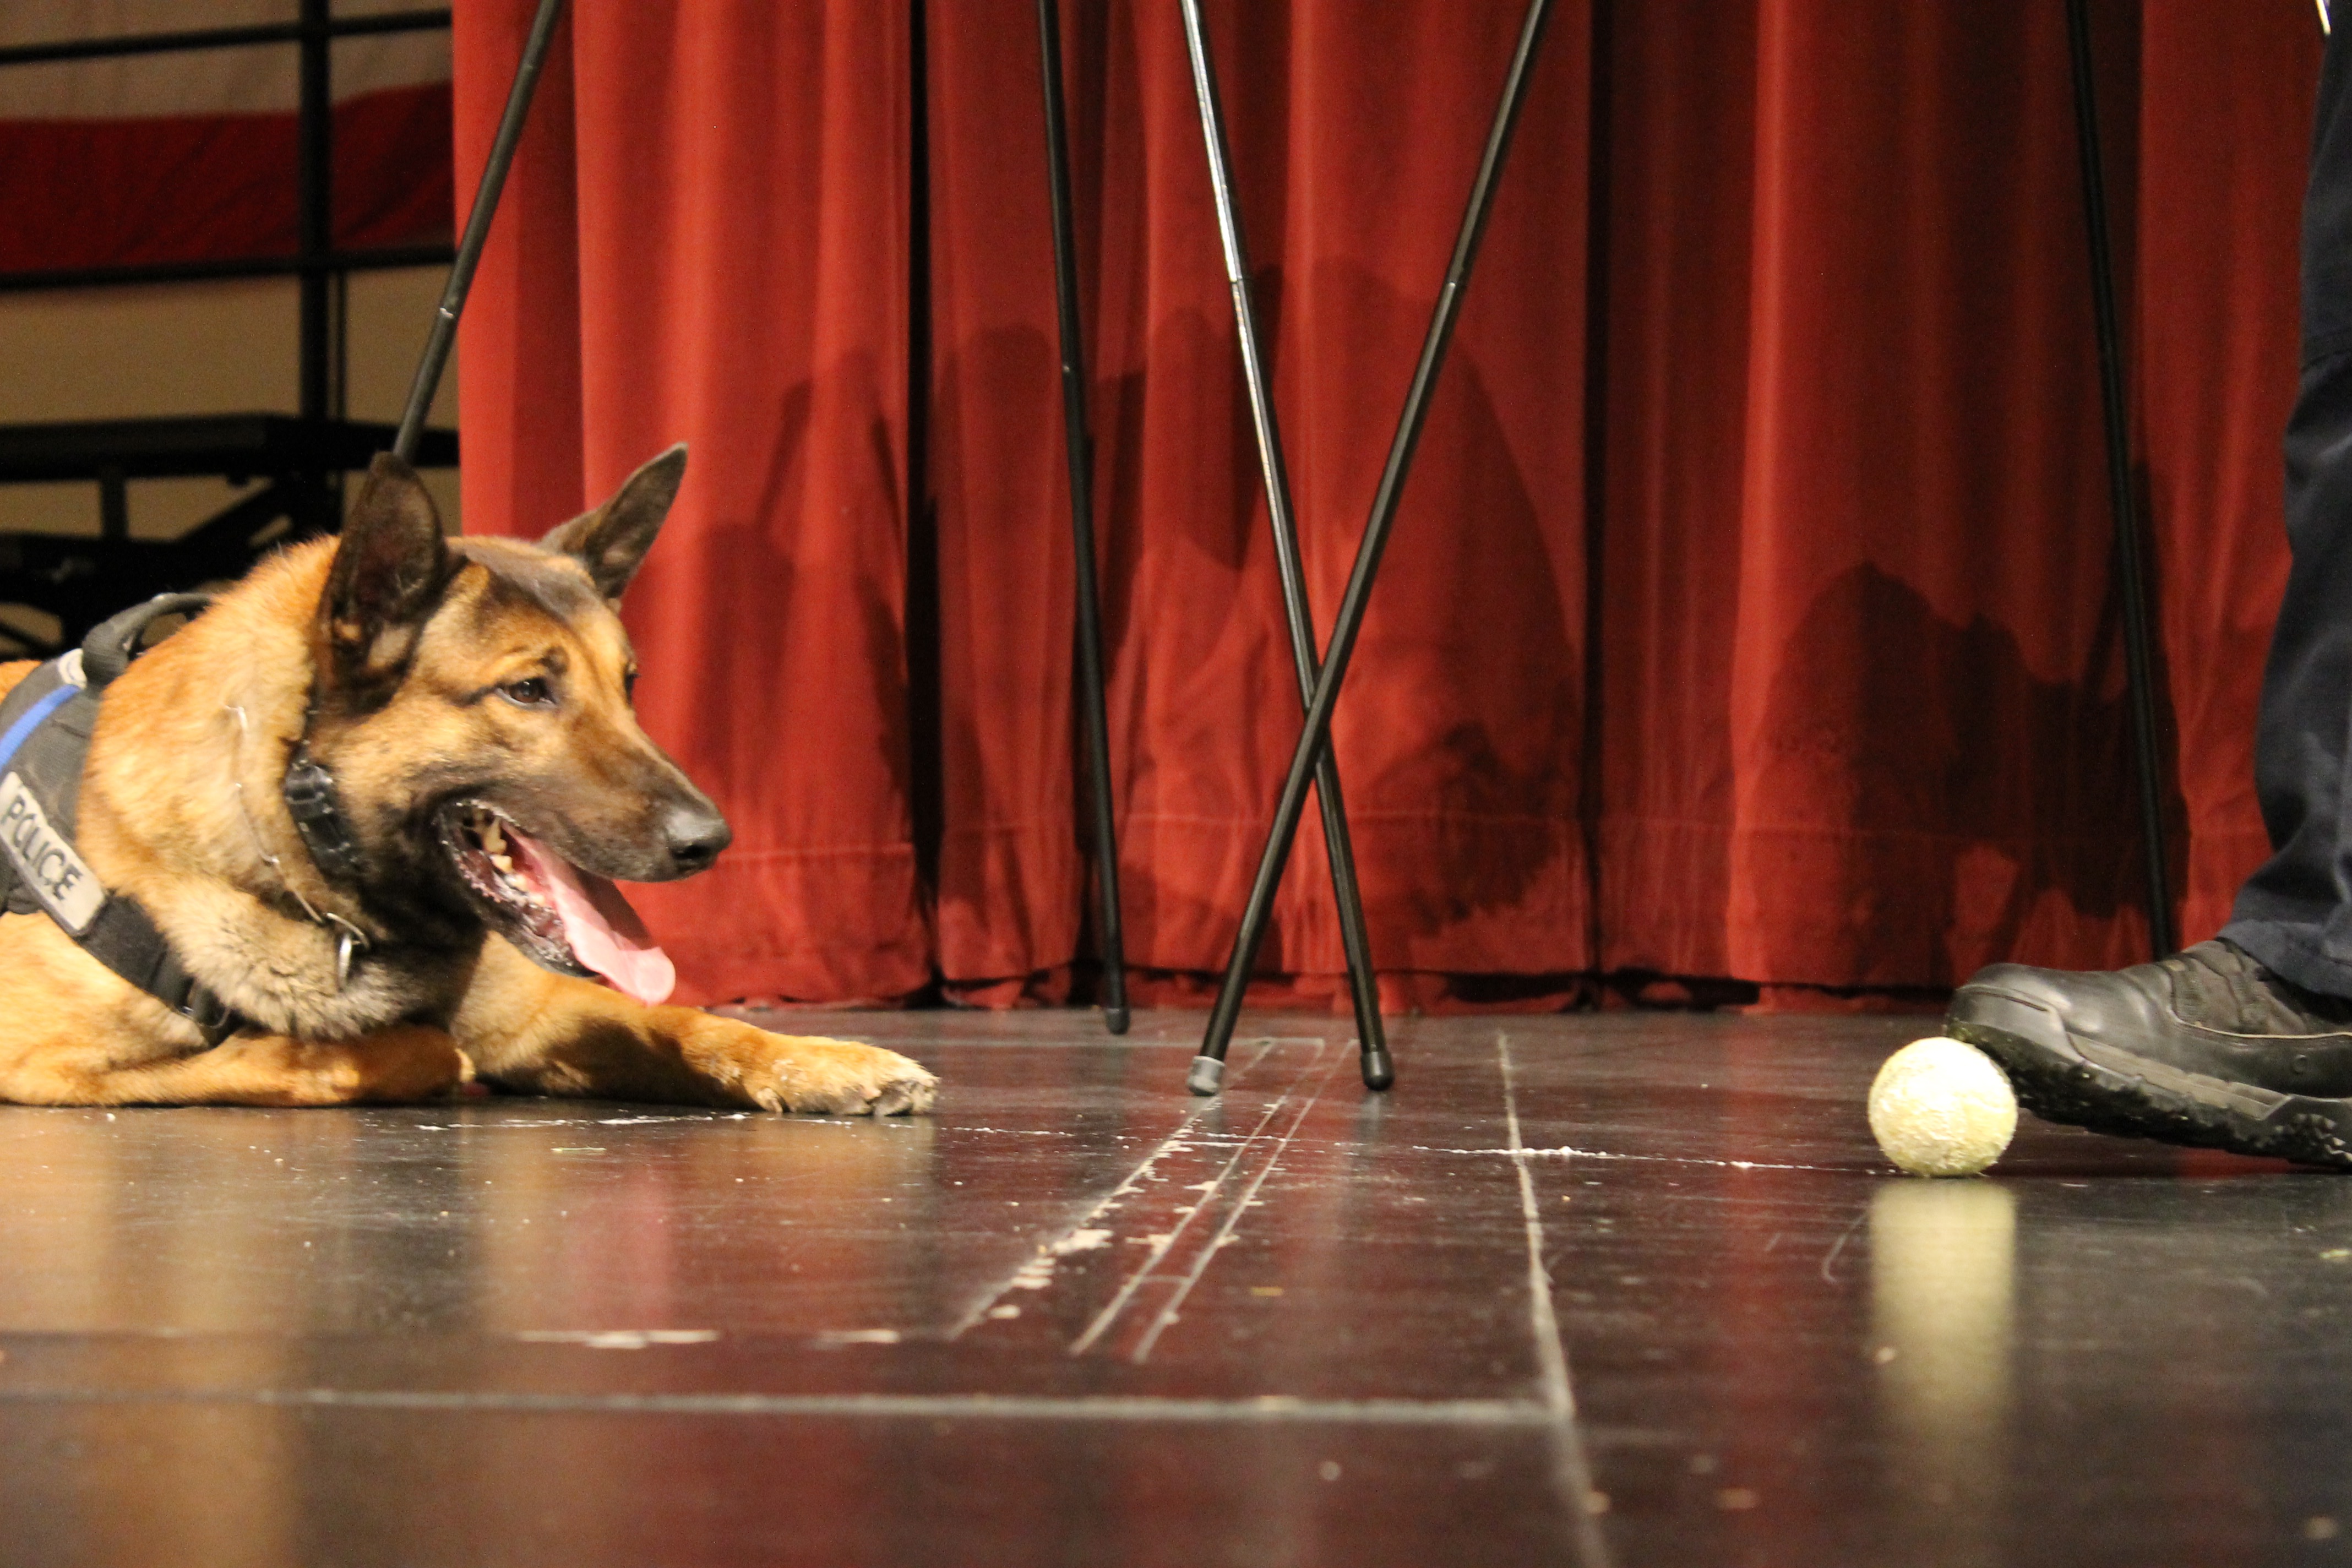 K-9 officer Reno entertains and educates Girls Staters; demonstrates the importance of canines in police forces